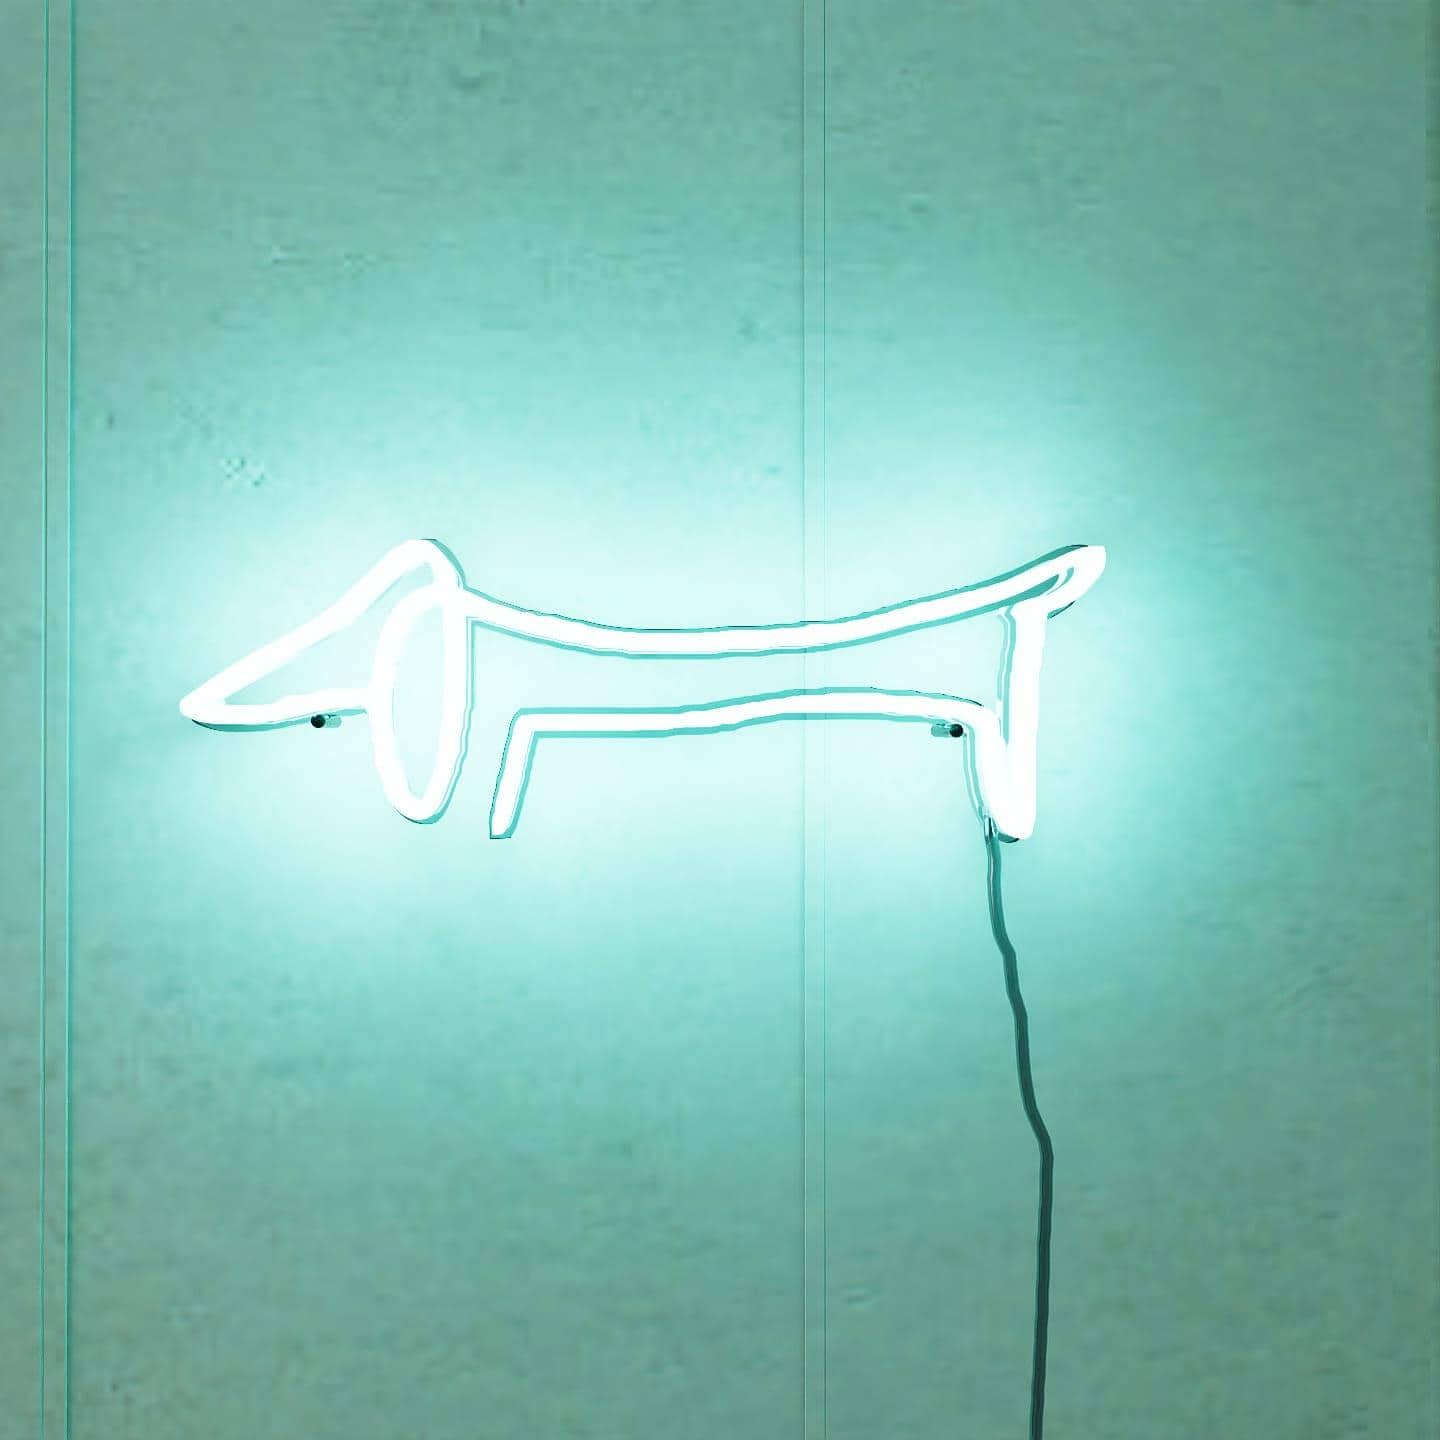 picasso-sketch-of-dachshund-hanging-on-wall-display-illuminated-at-night-green